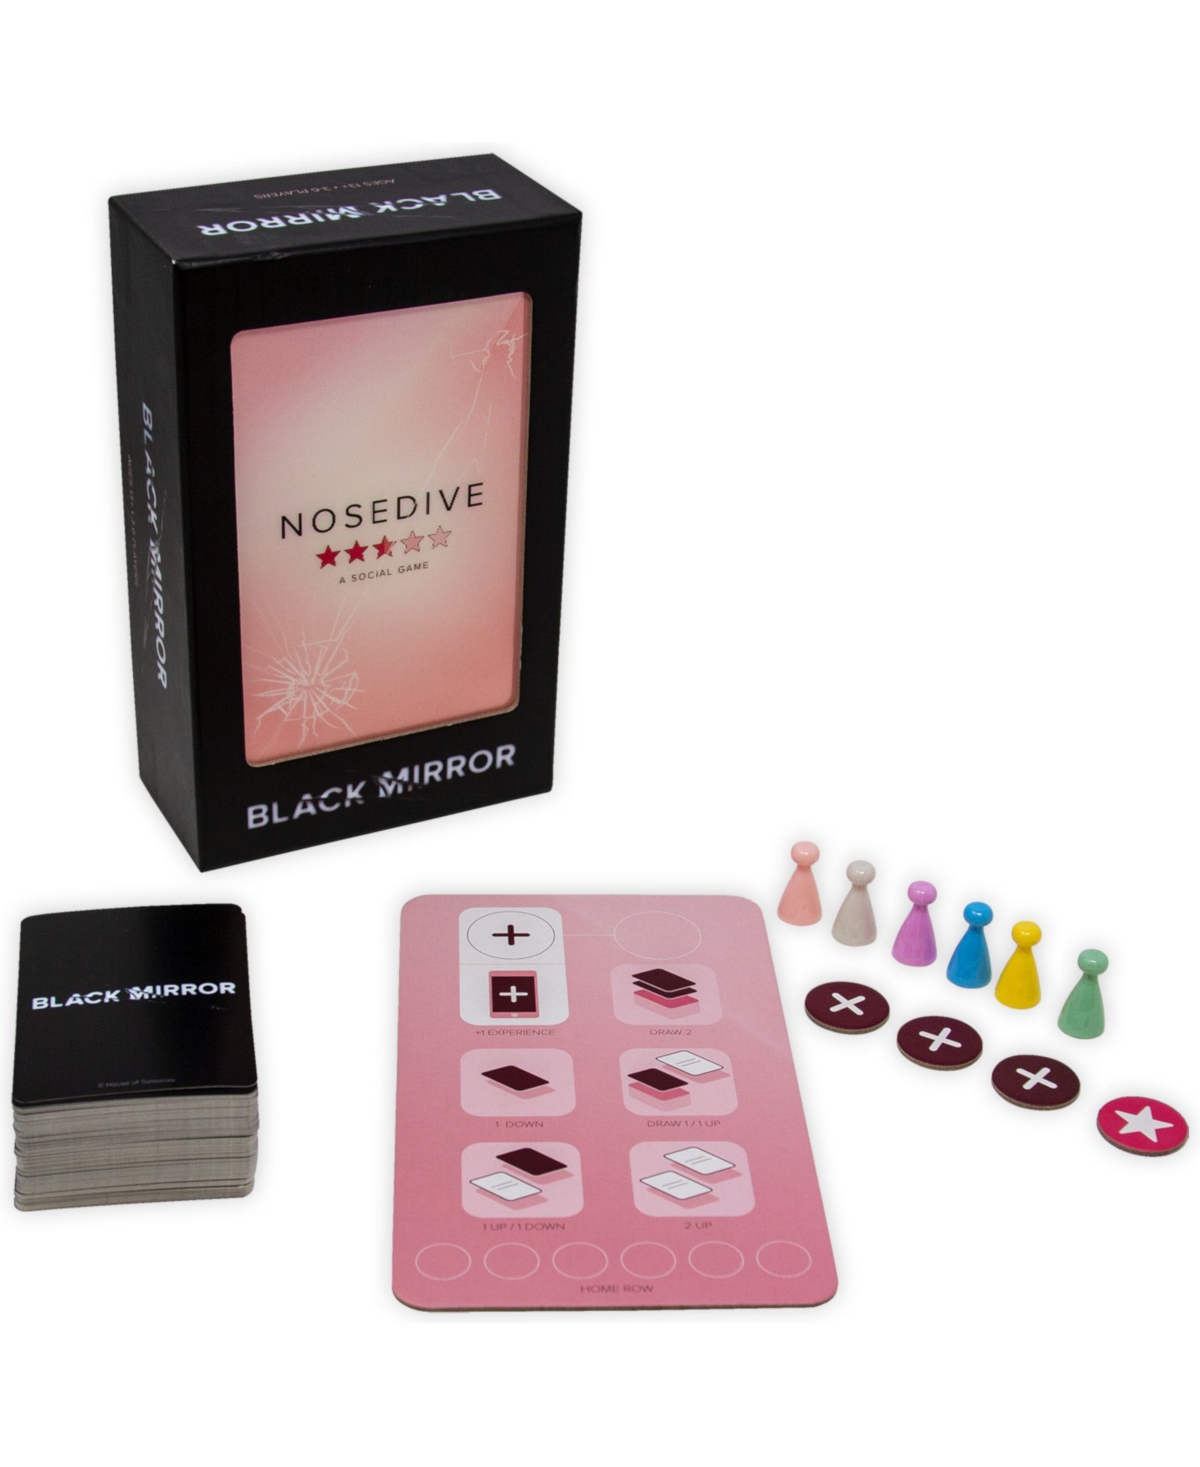 Shop Masterpieces Puzzles Asmodee Editions Black Mirror- Nosedive Strategy Card Game In Multi